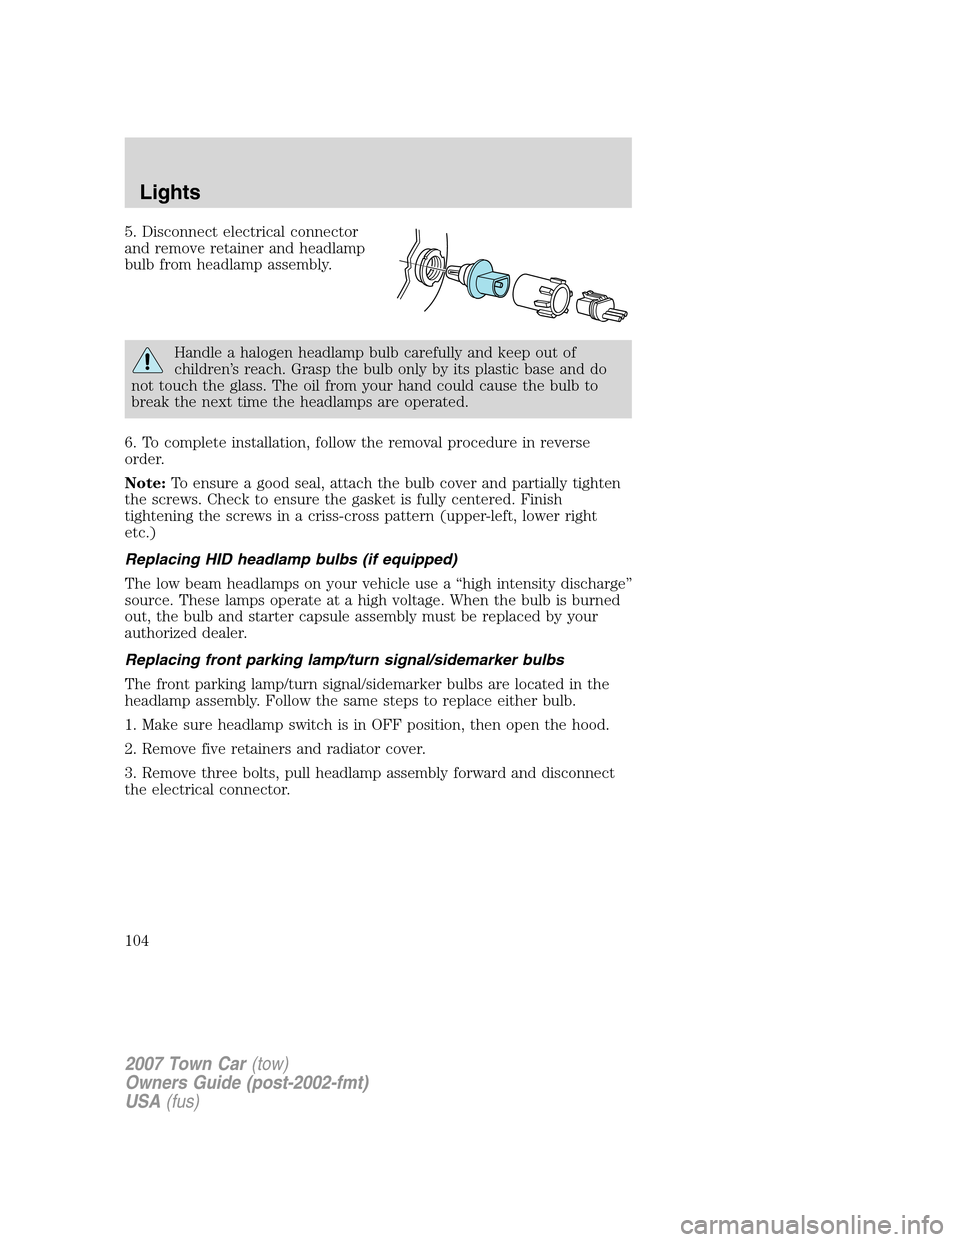 LINCOLN TOWN CAR 2007  Owners Manual 5. Disconnect electrical connector
and remove retainer and headlamp
bulb from headlamp assembly.
Handle a halogen headlamp bulb carefully and keep out of
children’s reach. Grasp the bulb only by its